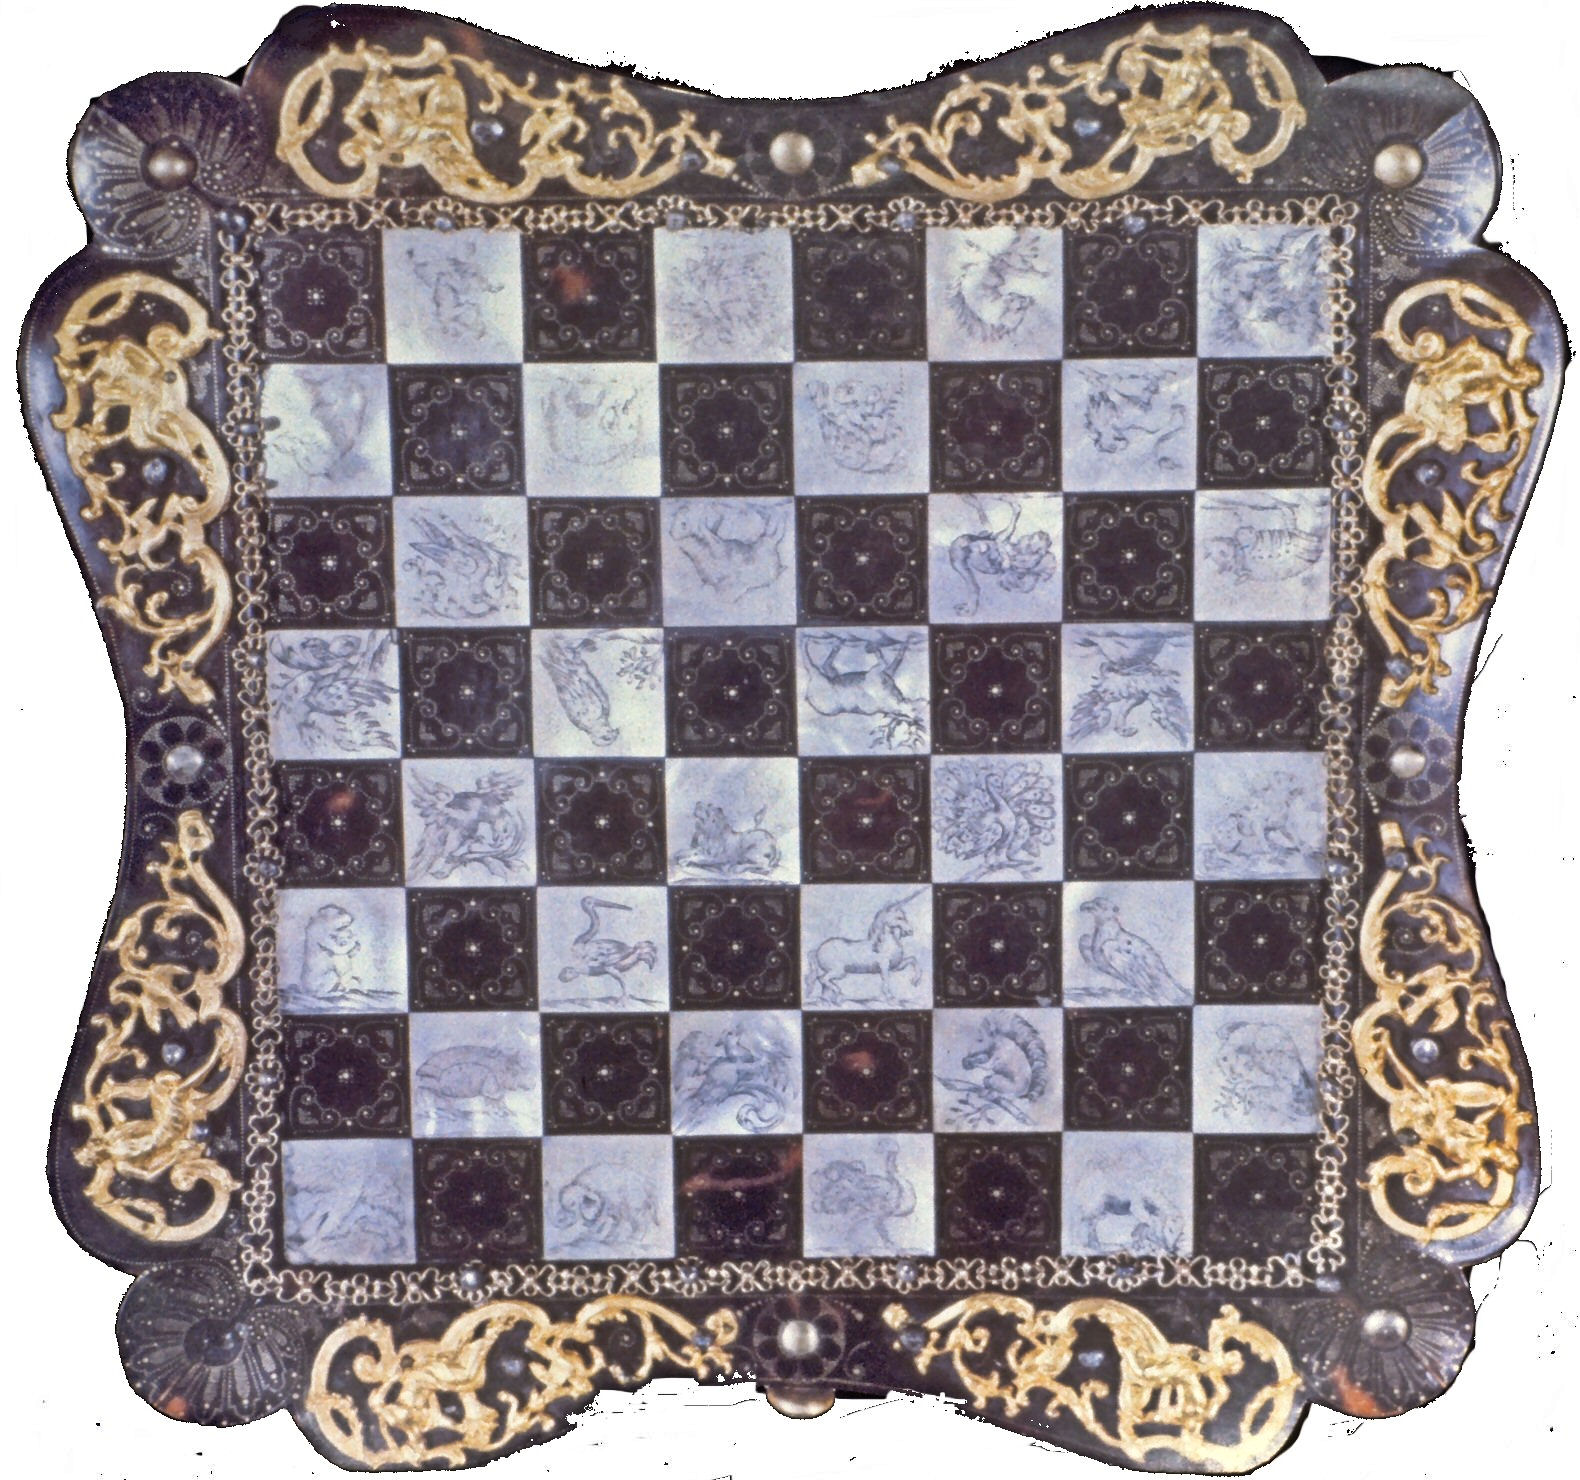 Fluted German chess board